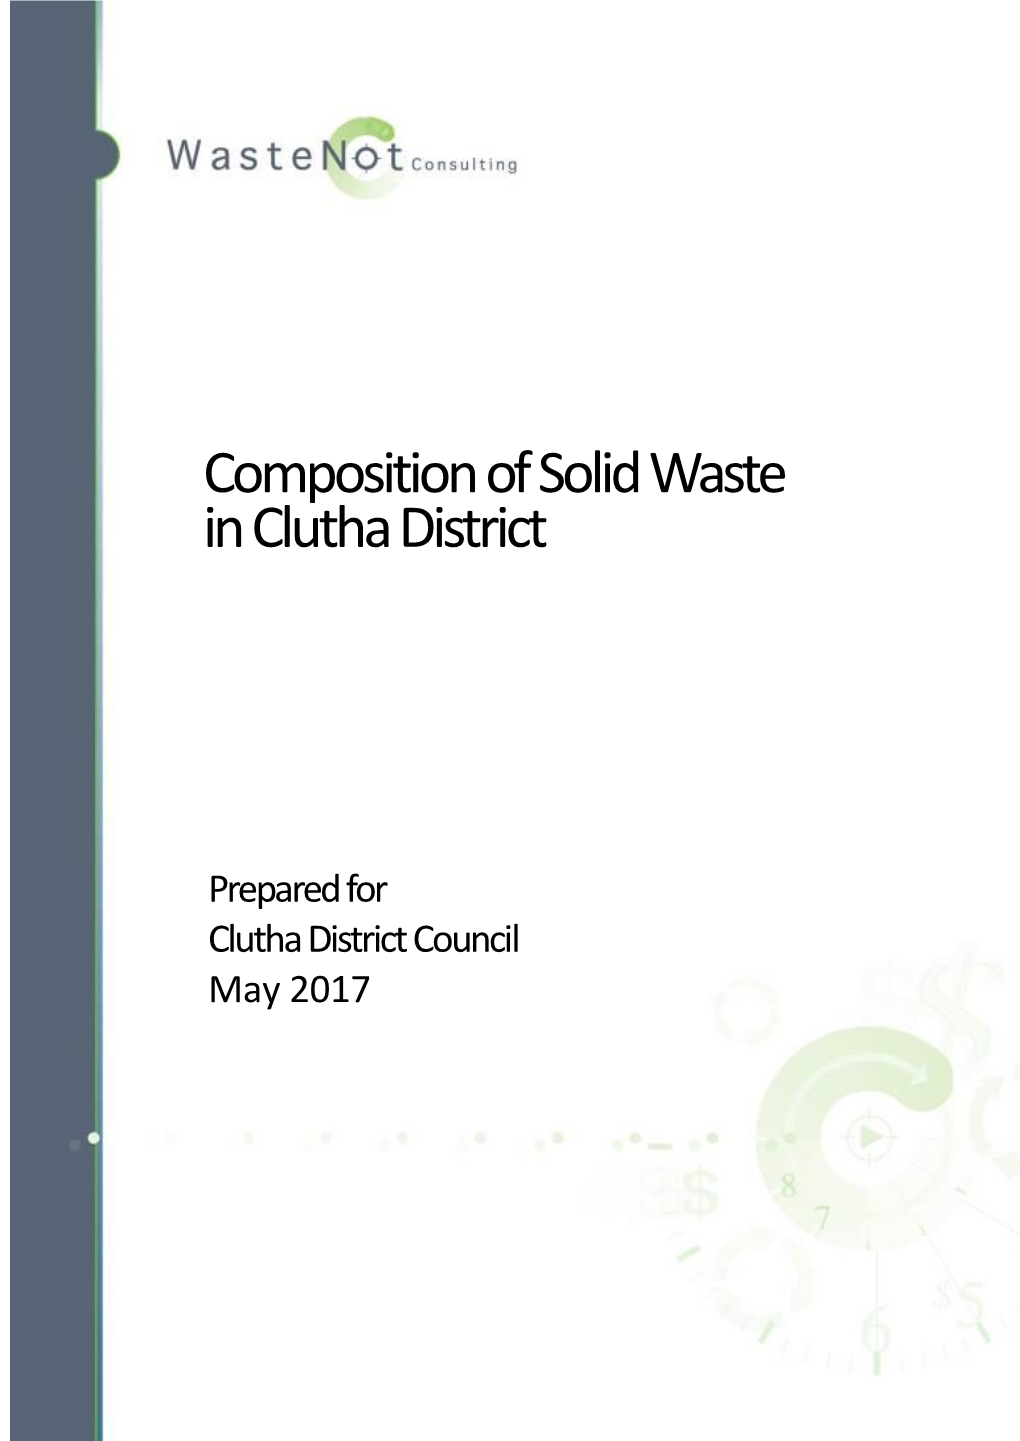 Composition of Solid Waste in Clutha District